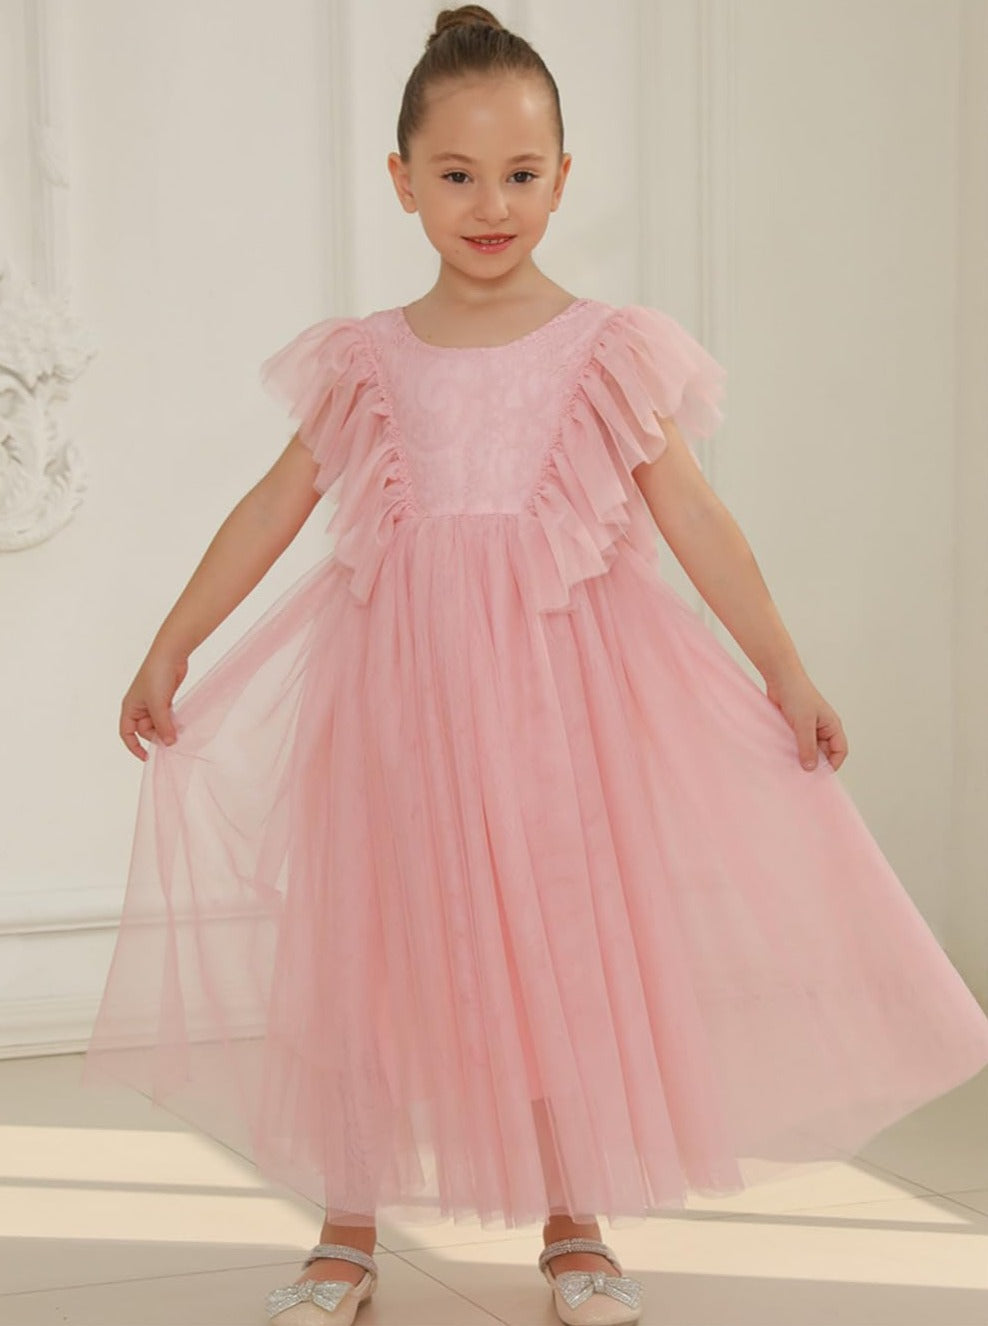 Paisley Lace Flower Girl Dress in Pink